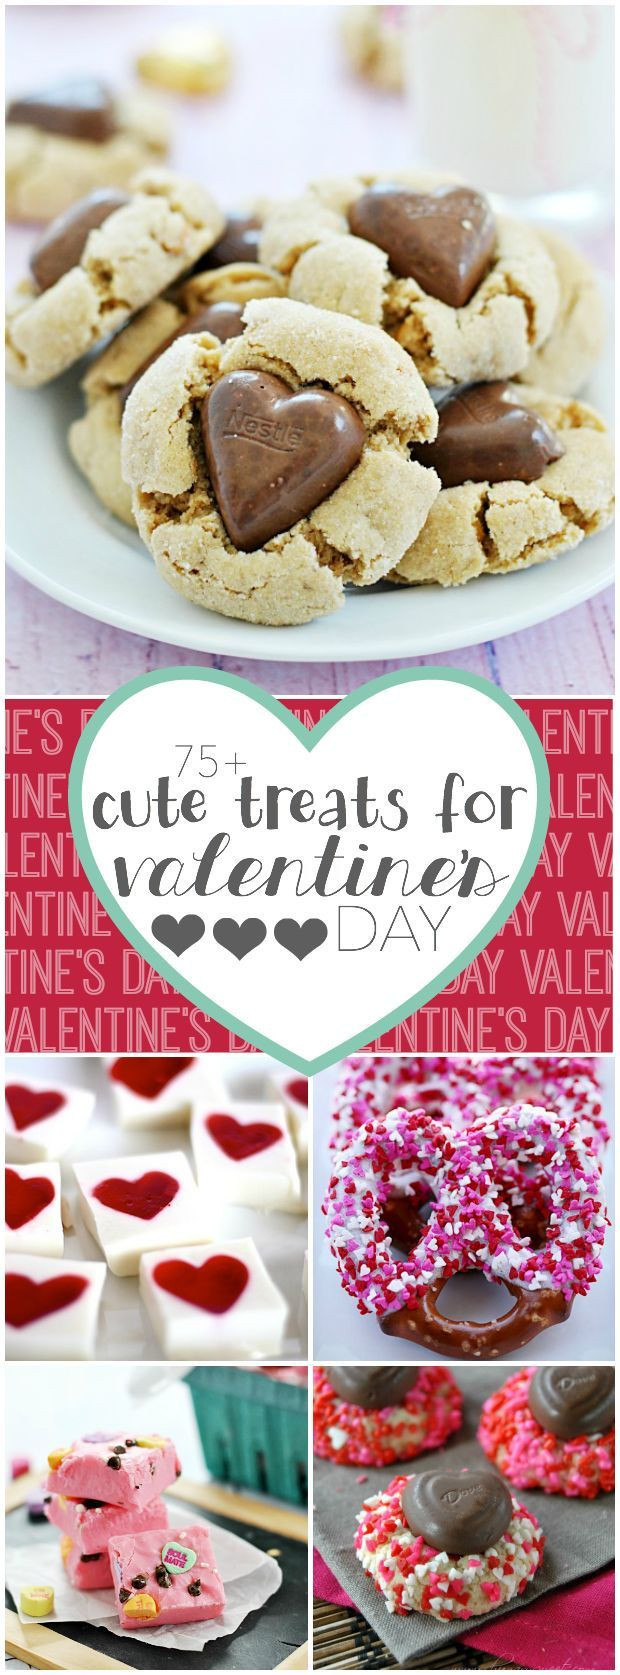 Valentine Day Food Gifts
 The Best Valentines Food Gifts Best Round Up Recipe